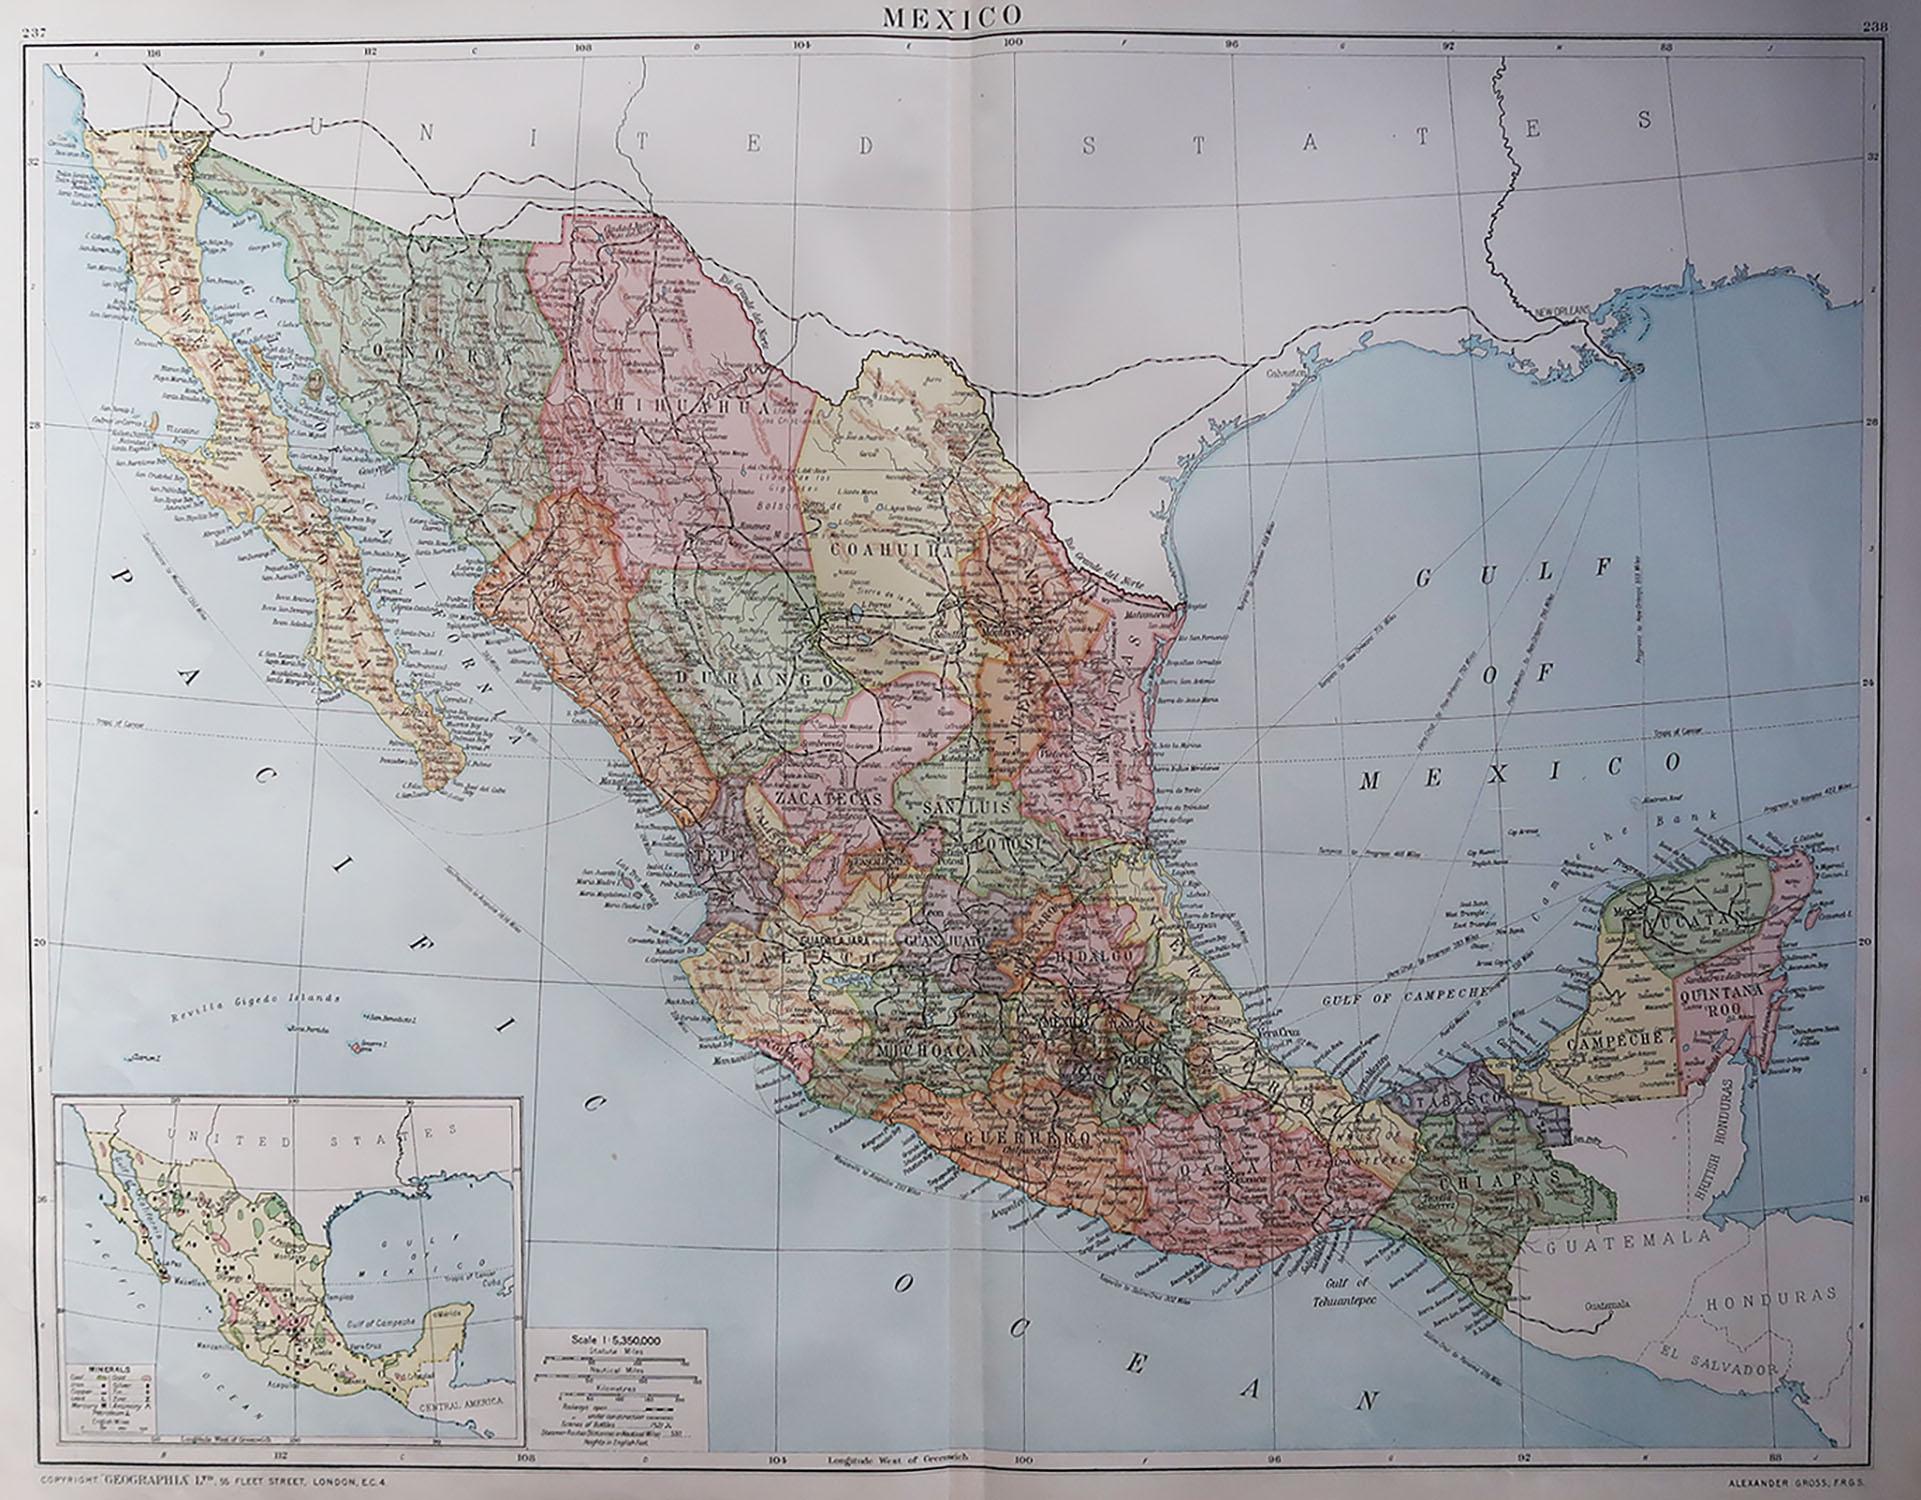 Great map of Mexico

Original color. 

Good condition 

Published by Alexander Gross

Unframed.








